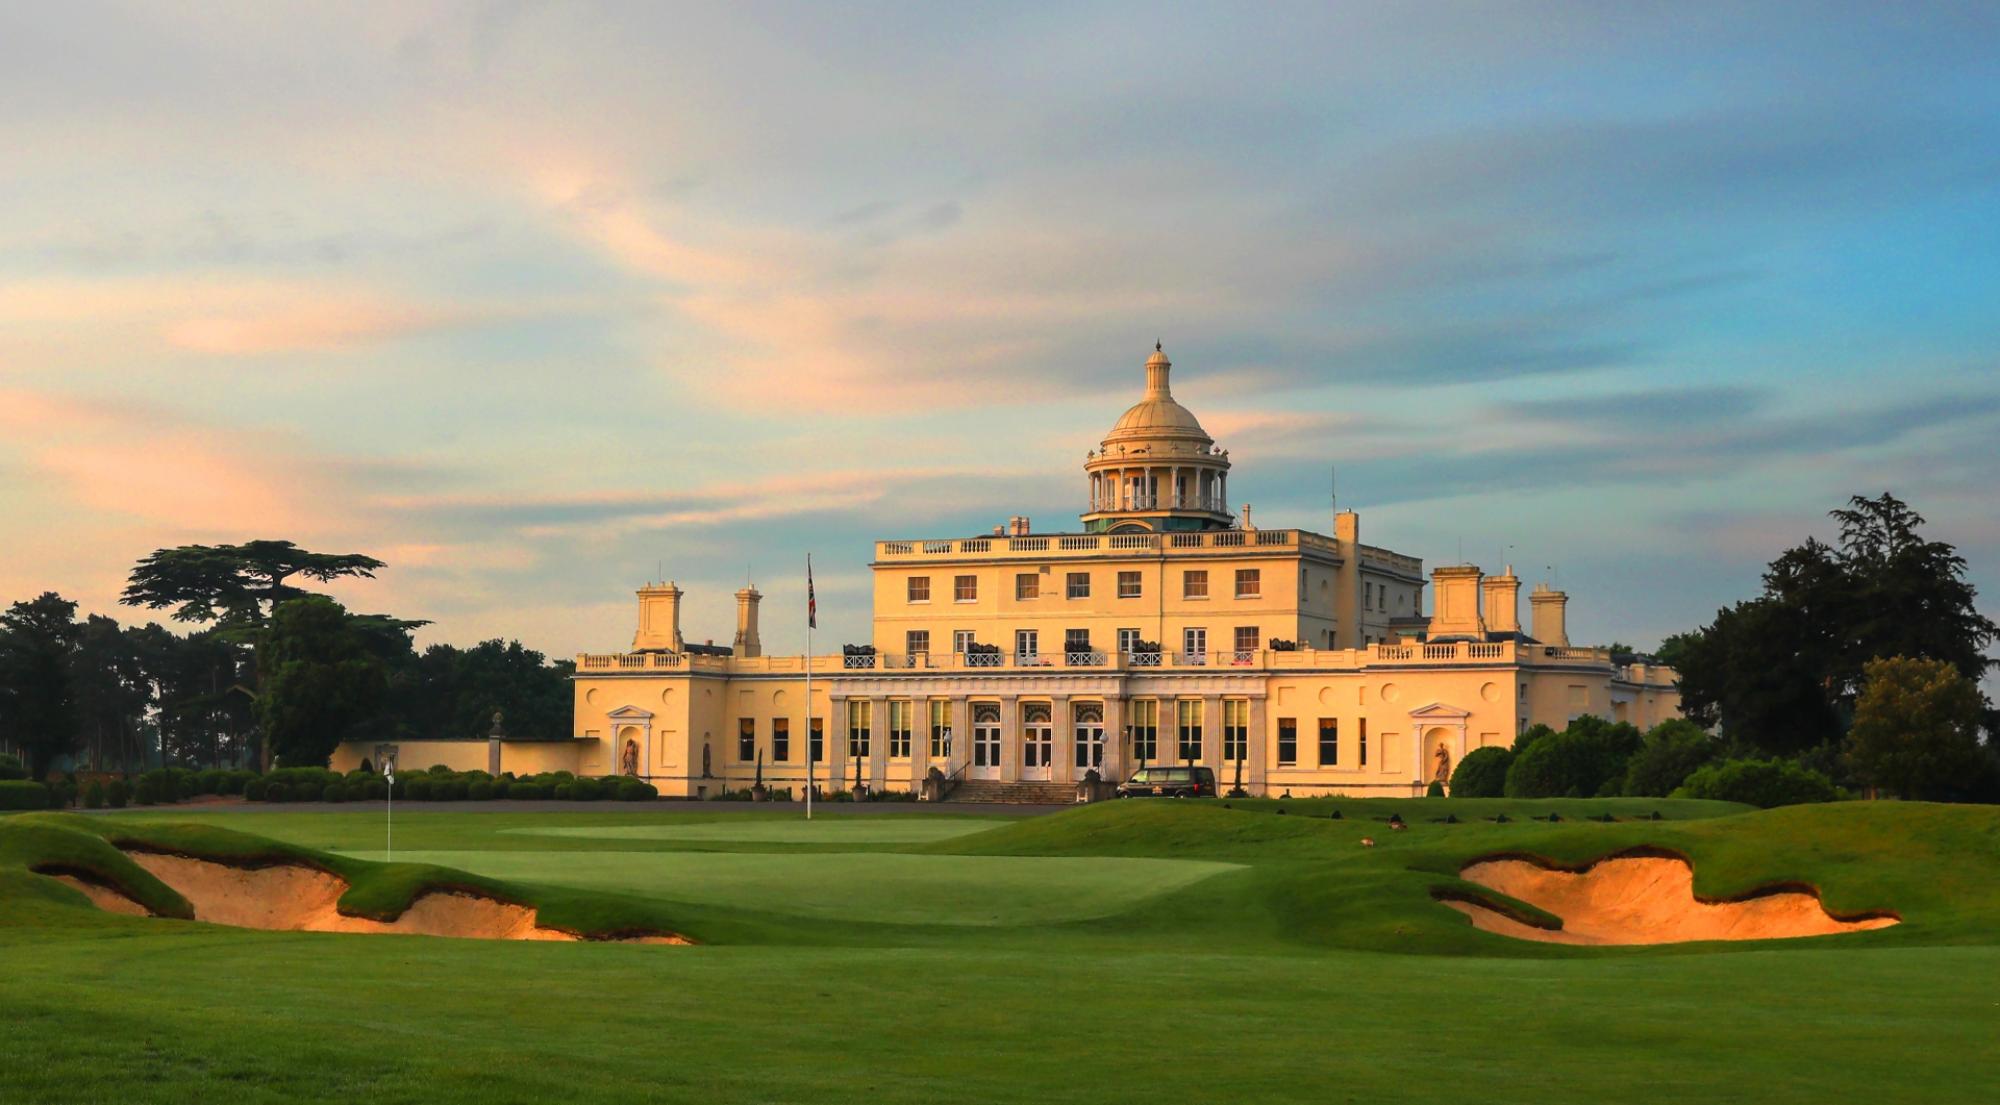 Stoke Park Country Club offers among the most desirable golf course in Buckinghamshire